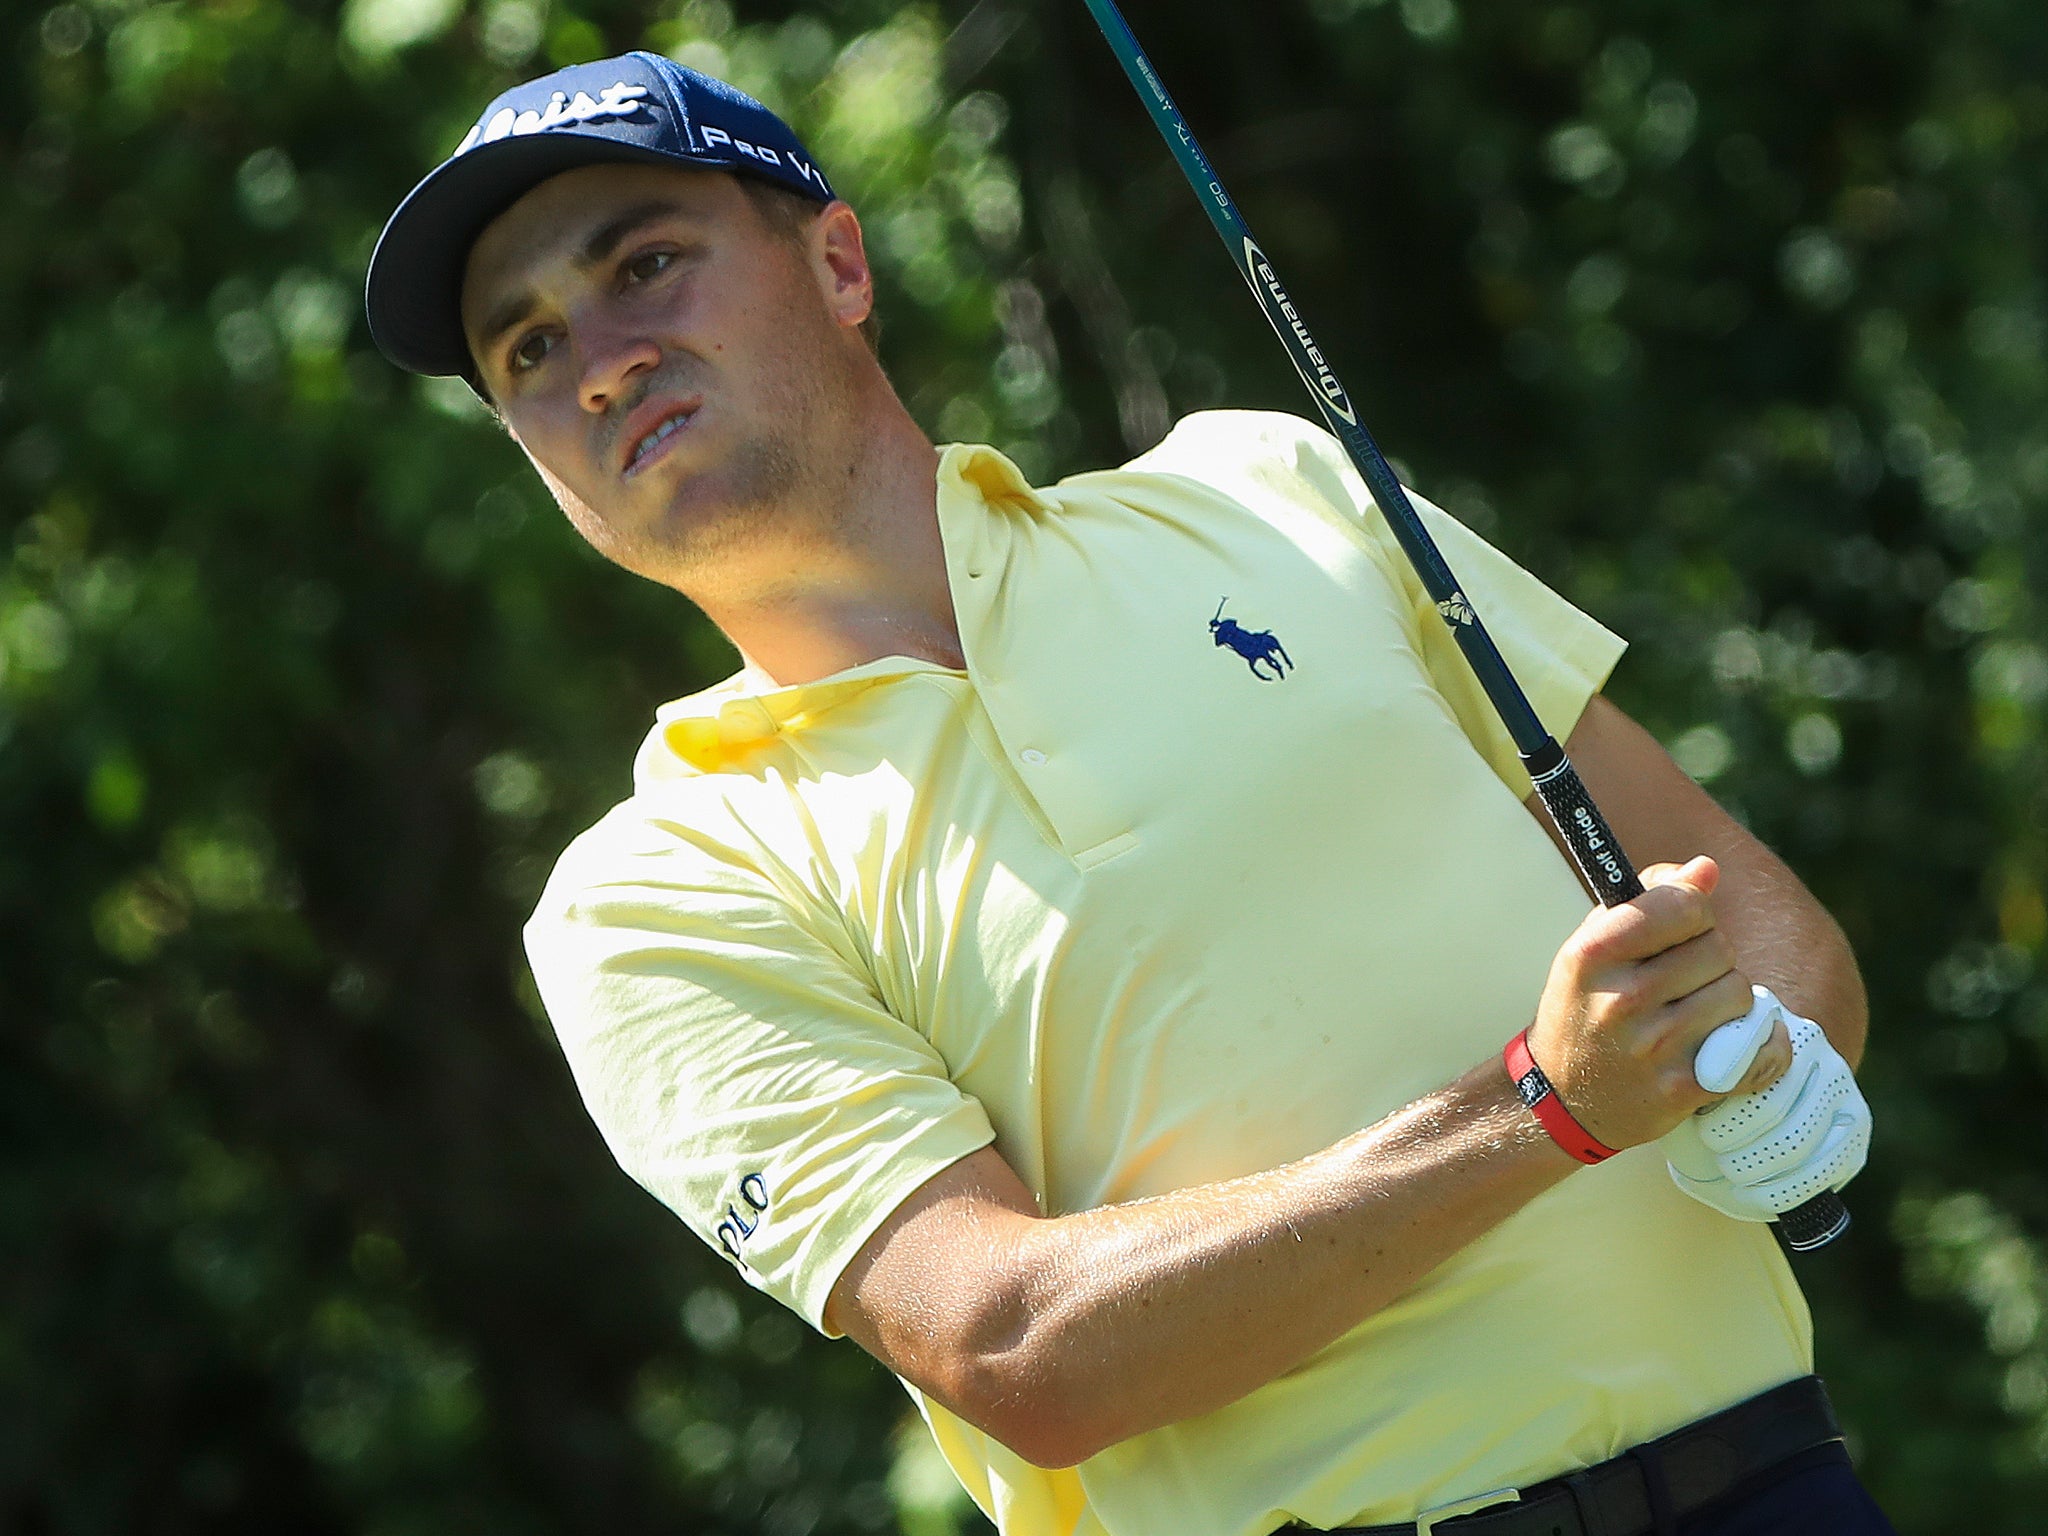 Justin Thomas will no longer stand for abuse from fans